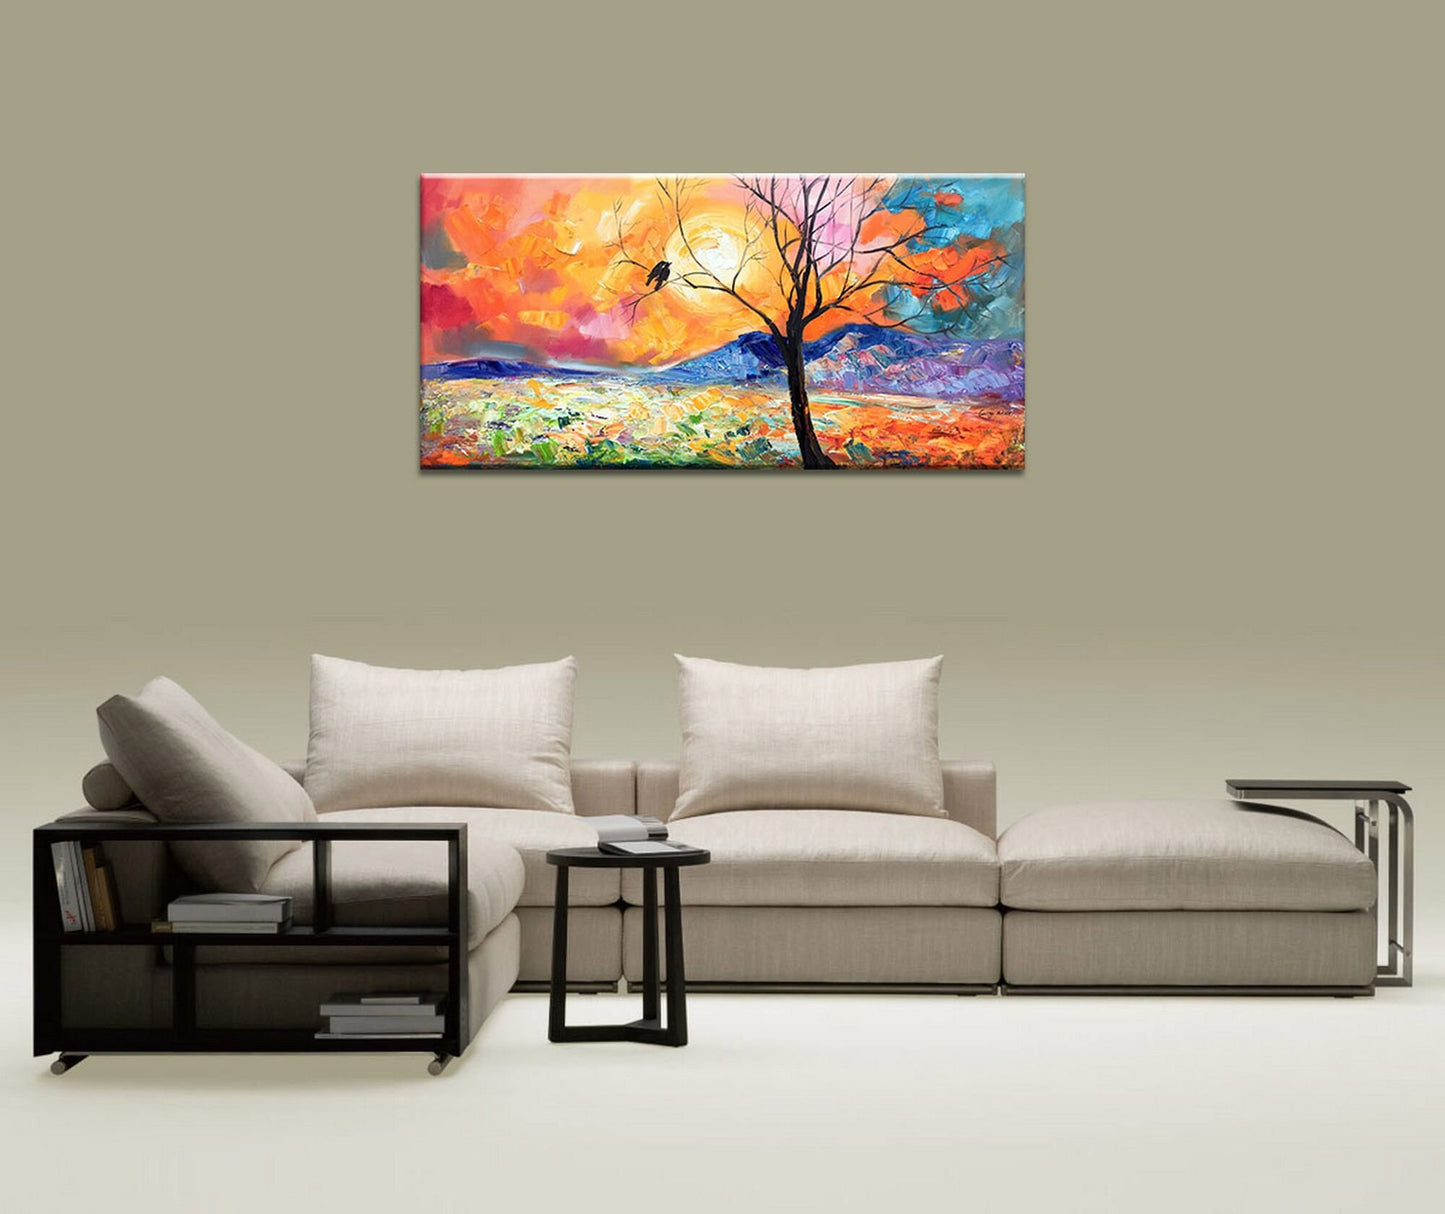 Canvas Art, Large Abstract Painting, Contemporary Art, Large Canvas Wall Art, Original Oil Painting, Love Birds, Tree Art, Abstract Painting